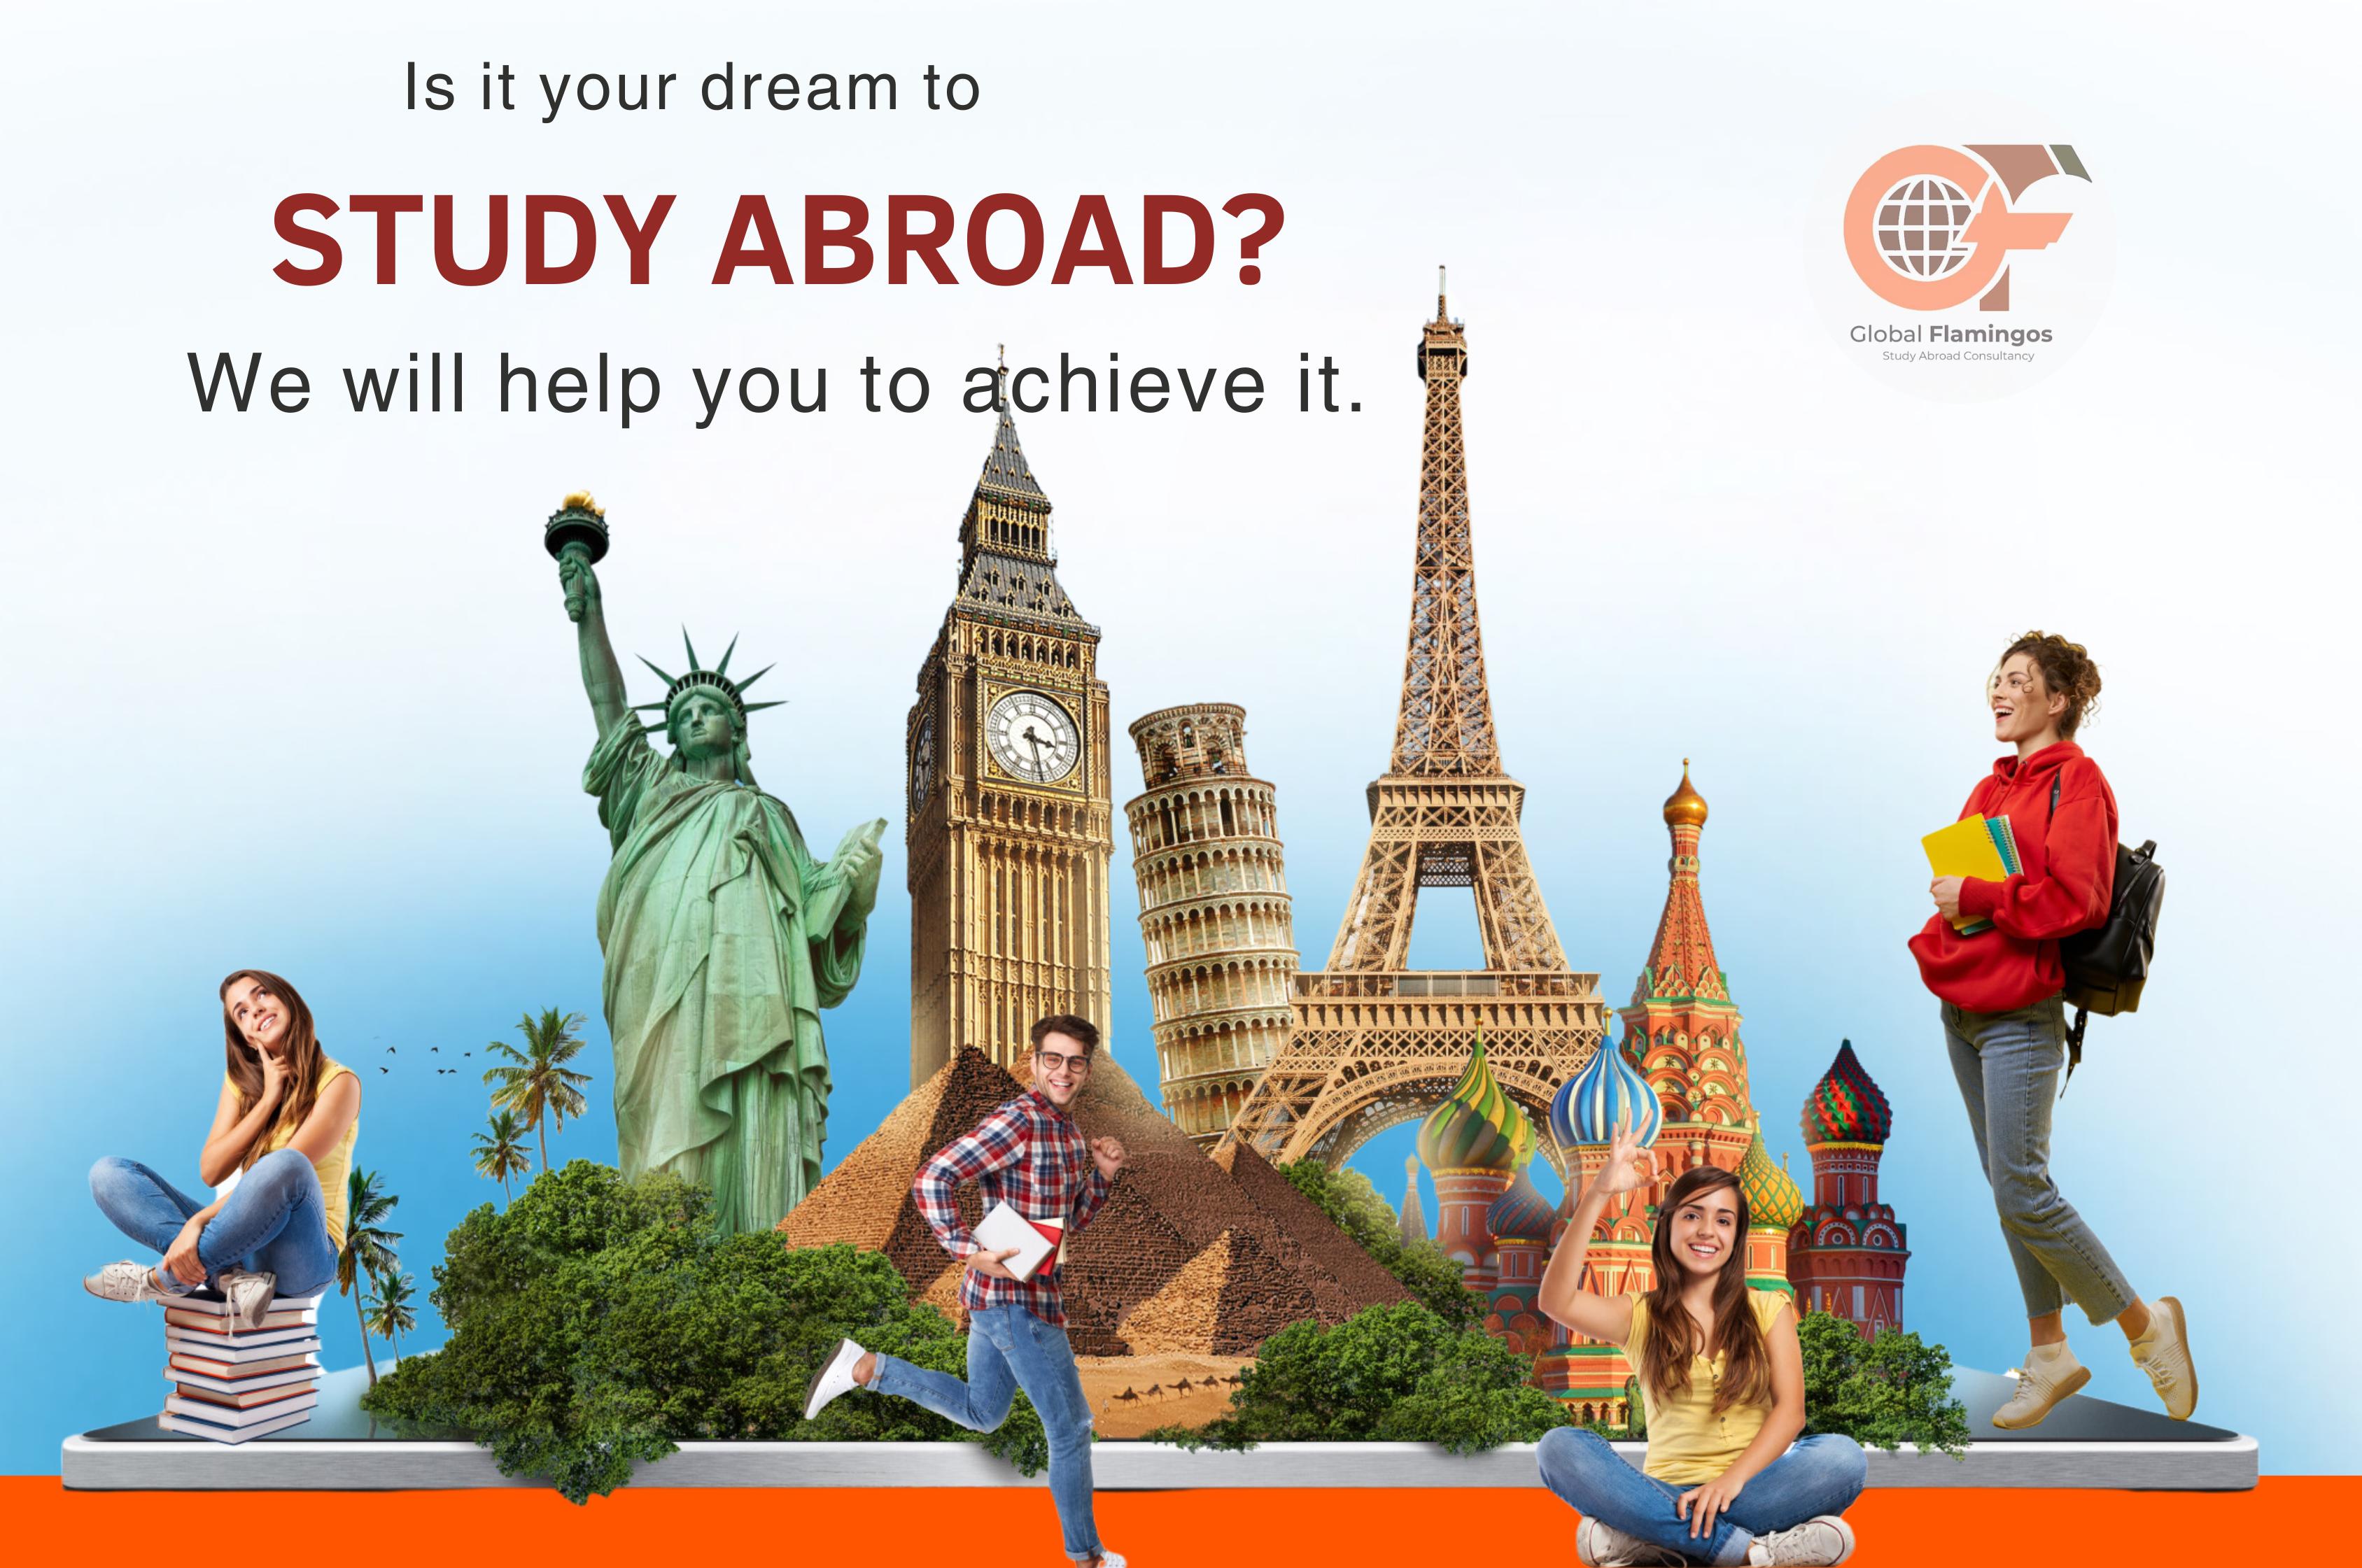 Studying Abroad: Transform Your Dream Into Reality with Global Flamingos